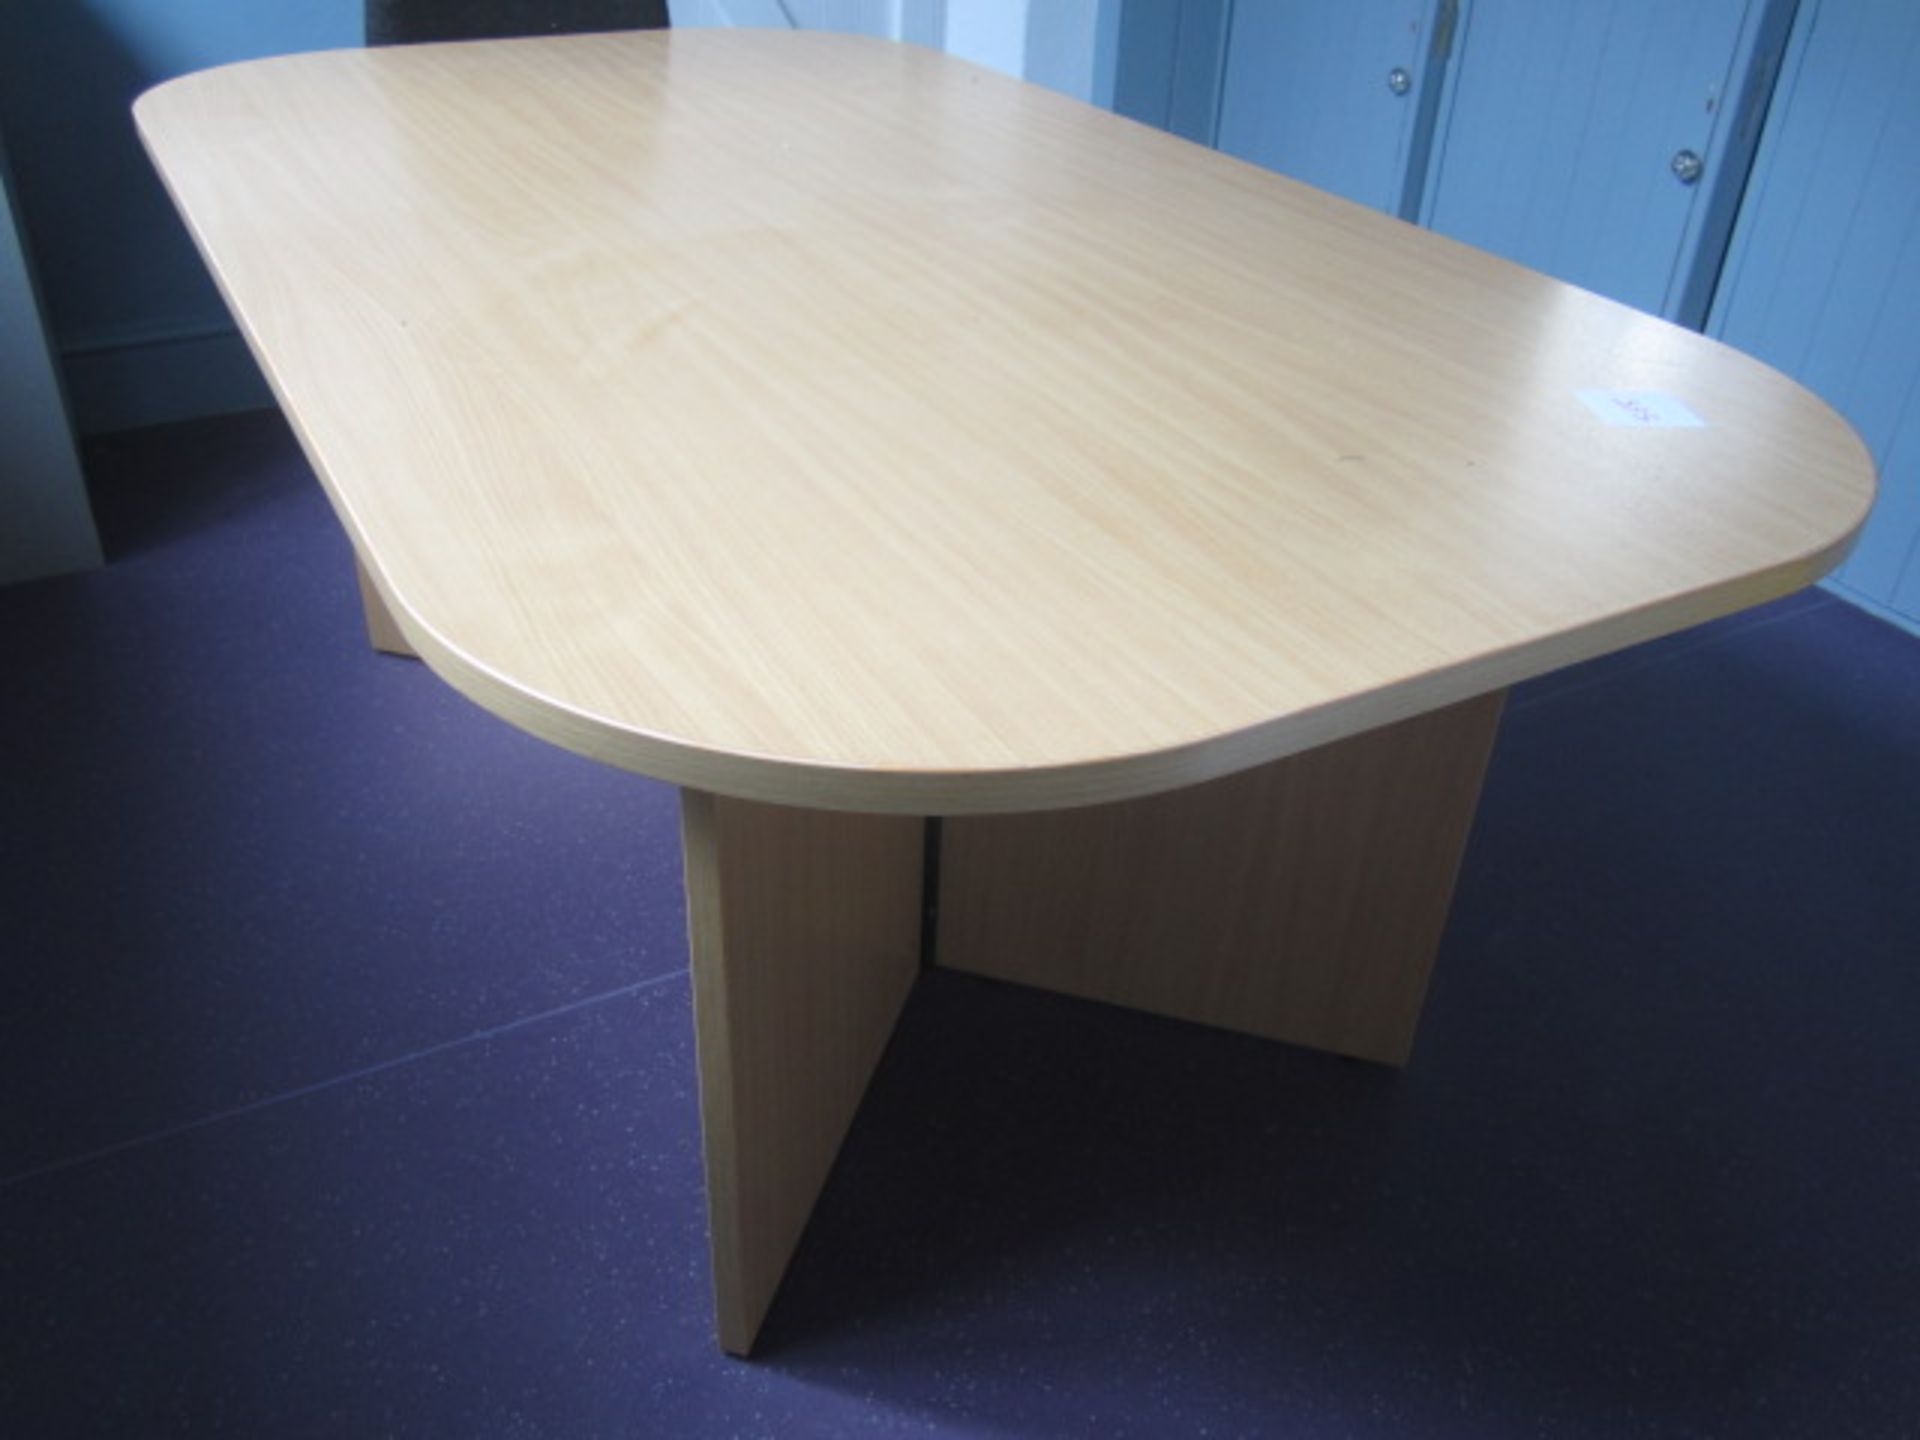 Lightwood effect meeting table and wood effect 2 door storage cupboard. Located at 6th form